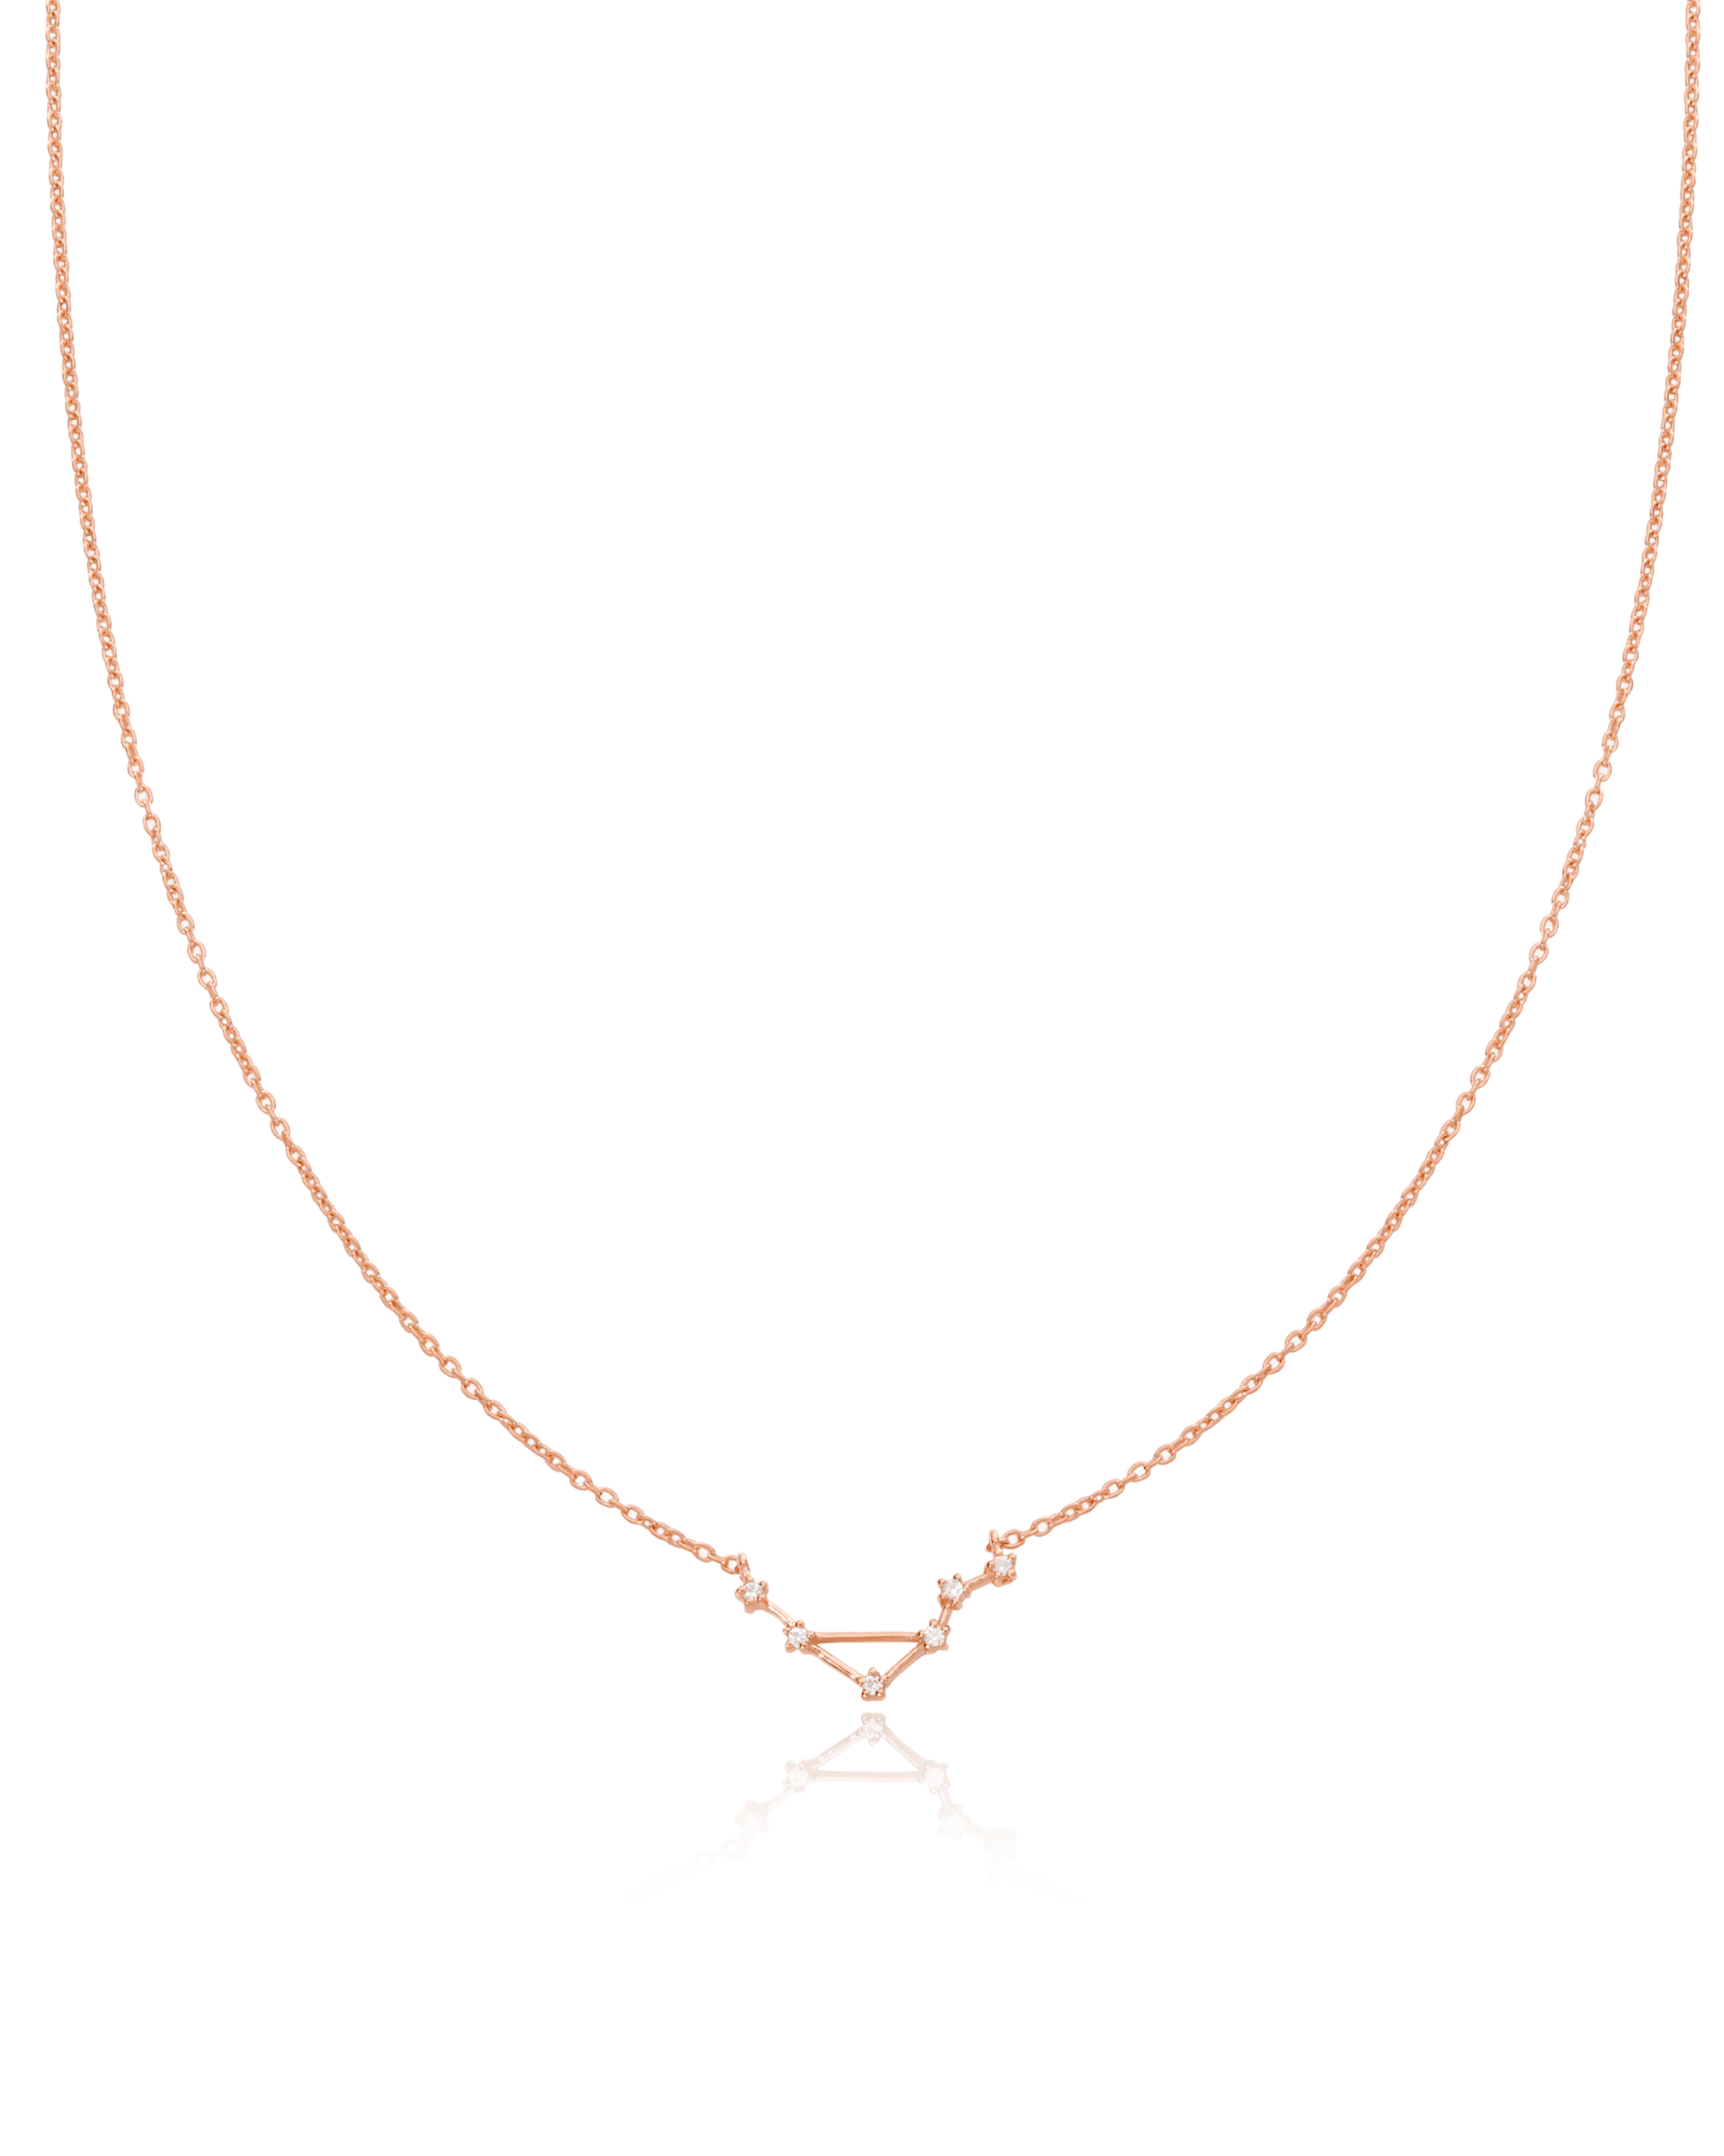 Single Constellation Necklace with Diamonds - 925 Sterling Silver Necklaces magal-dev 